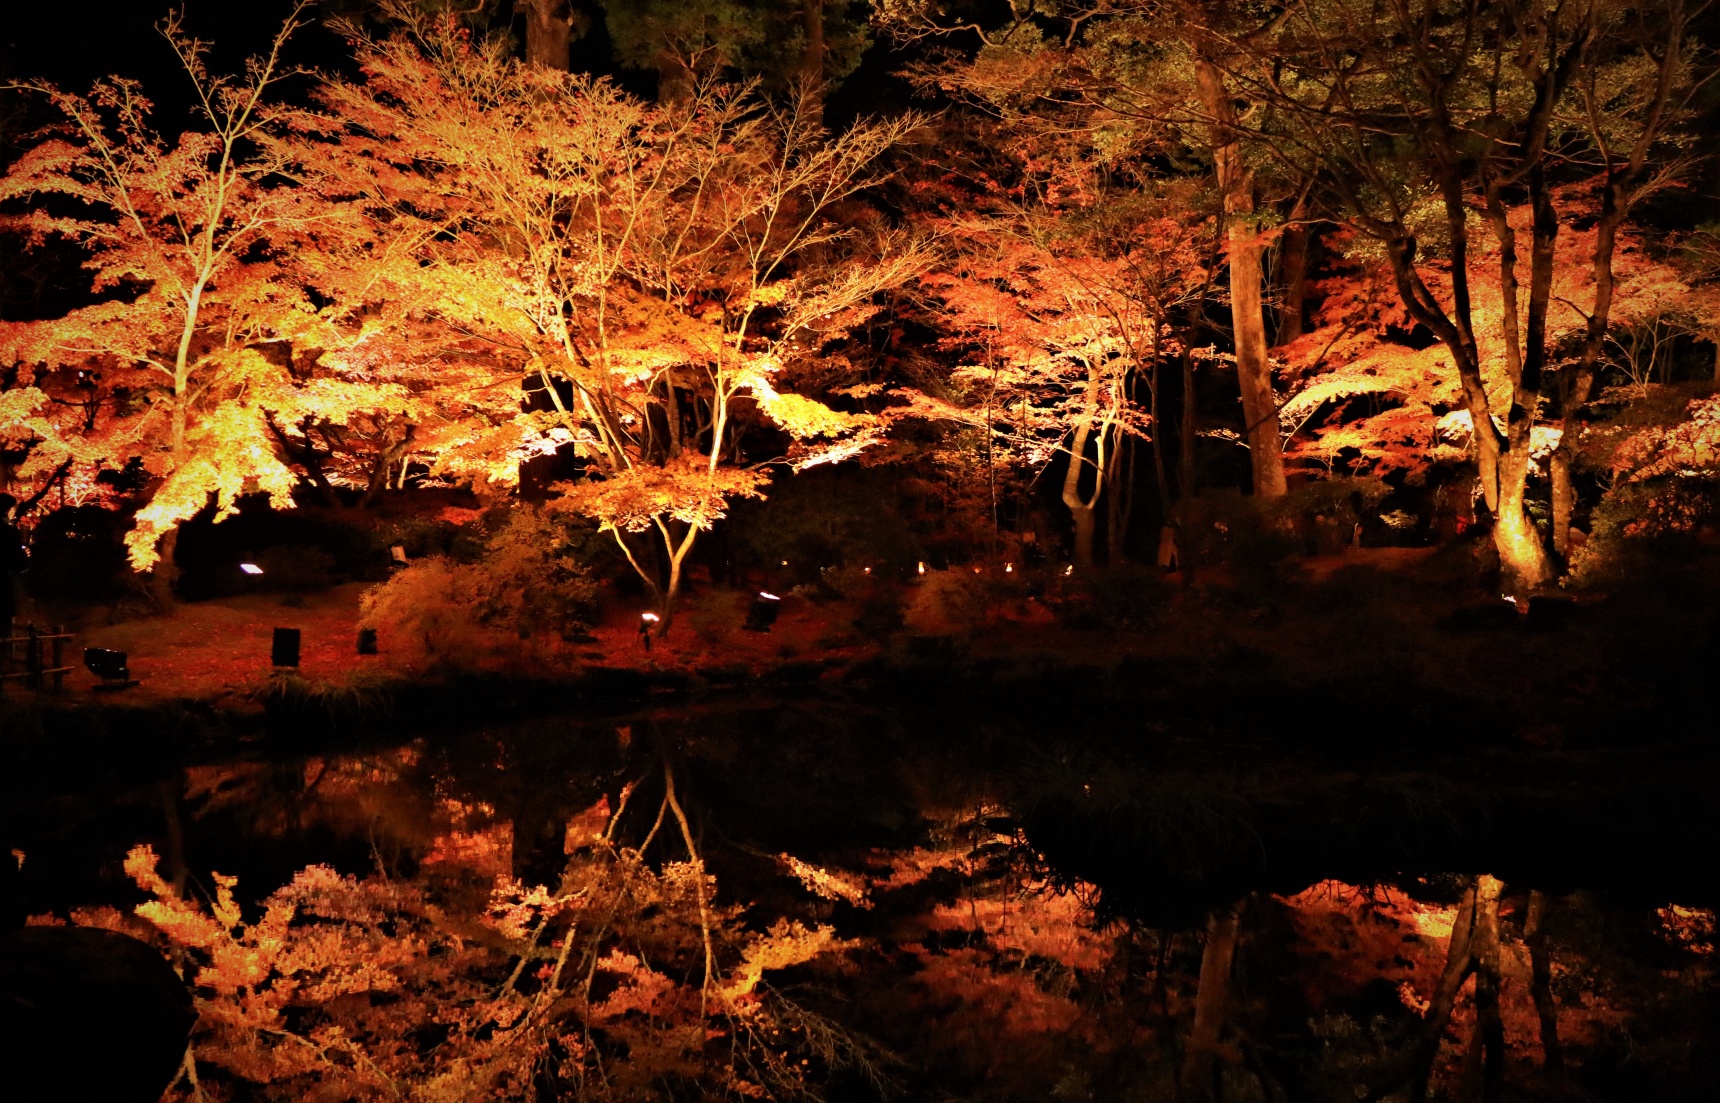 Beauty Beyond Be-‘leaf’ in Matsushima